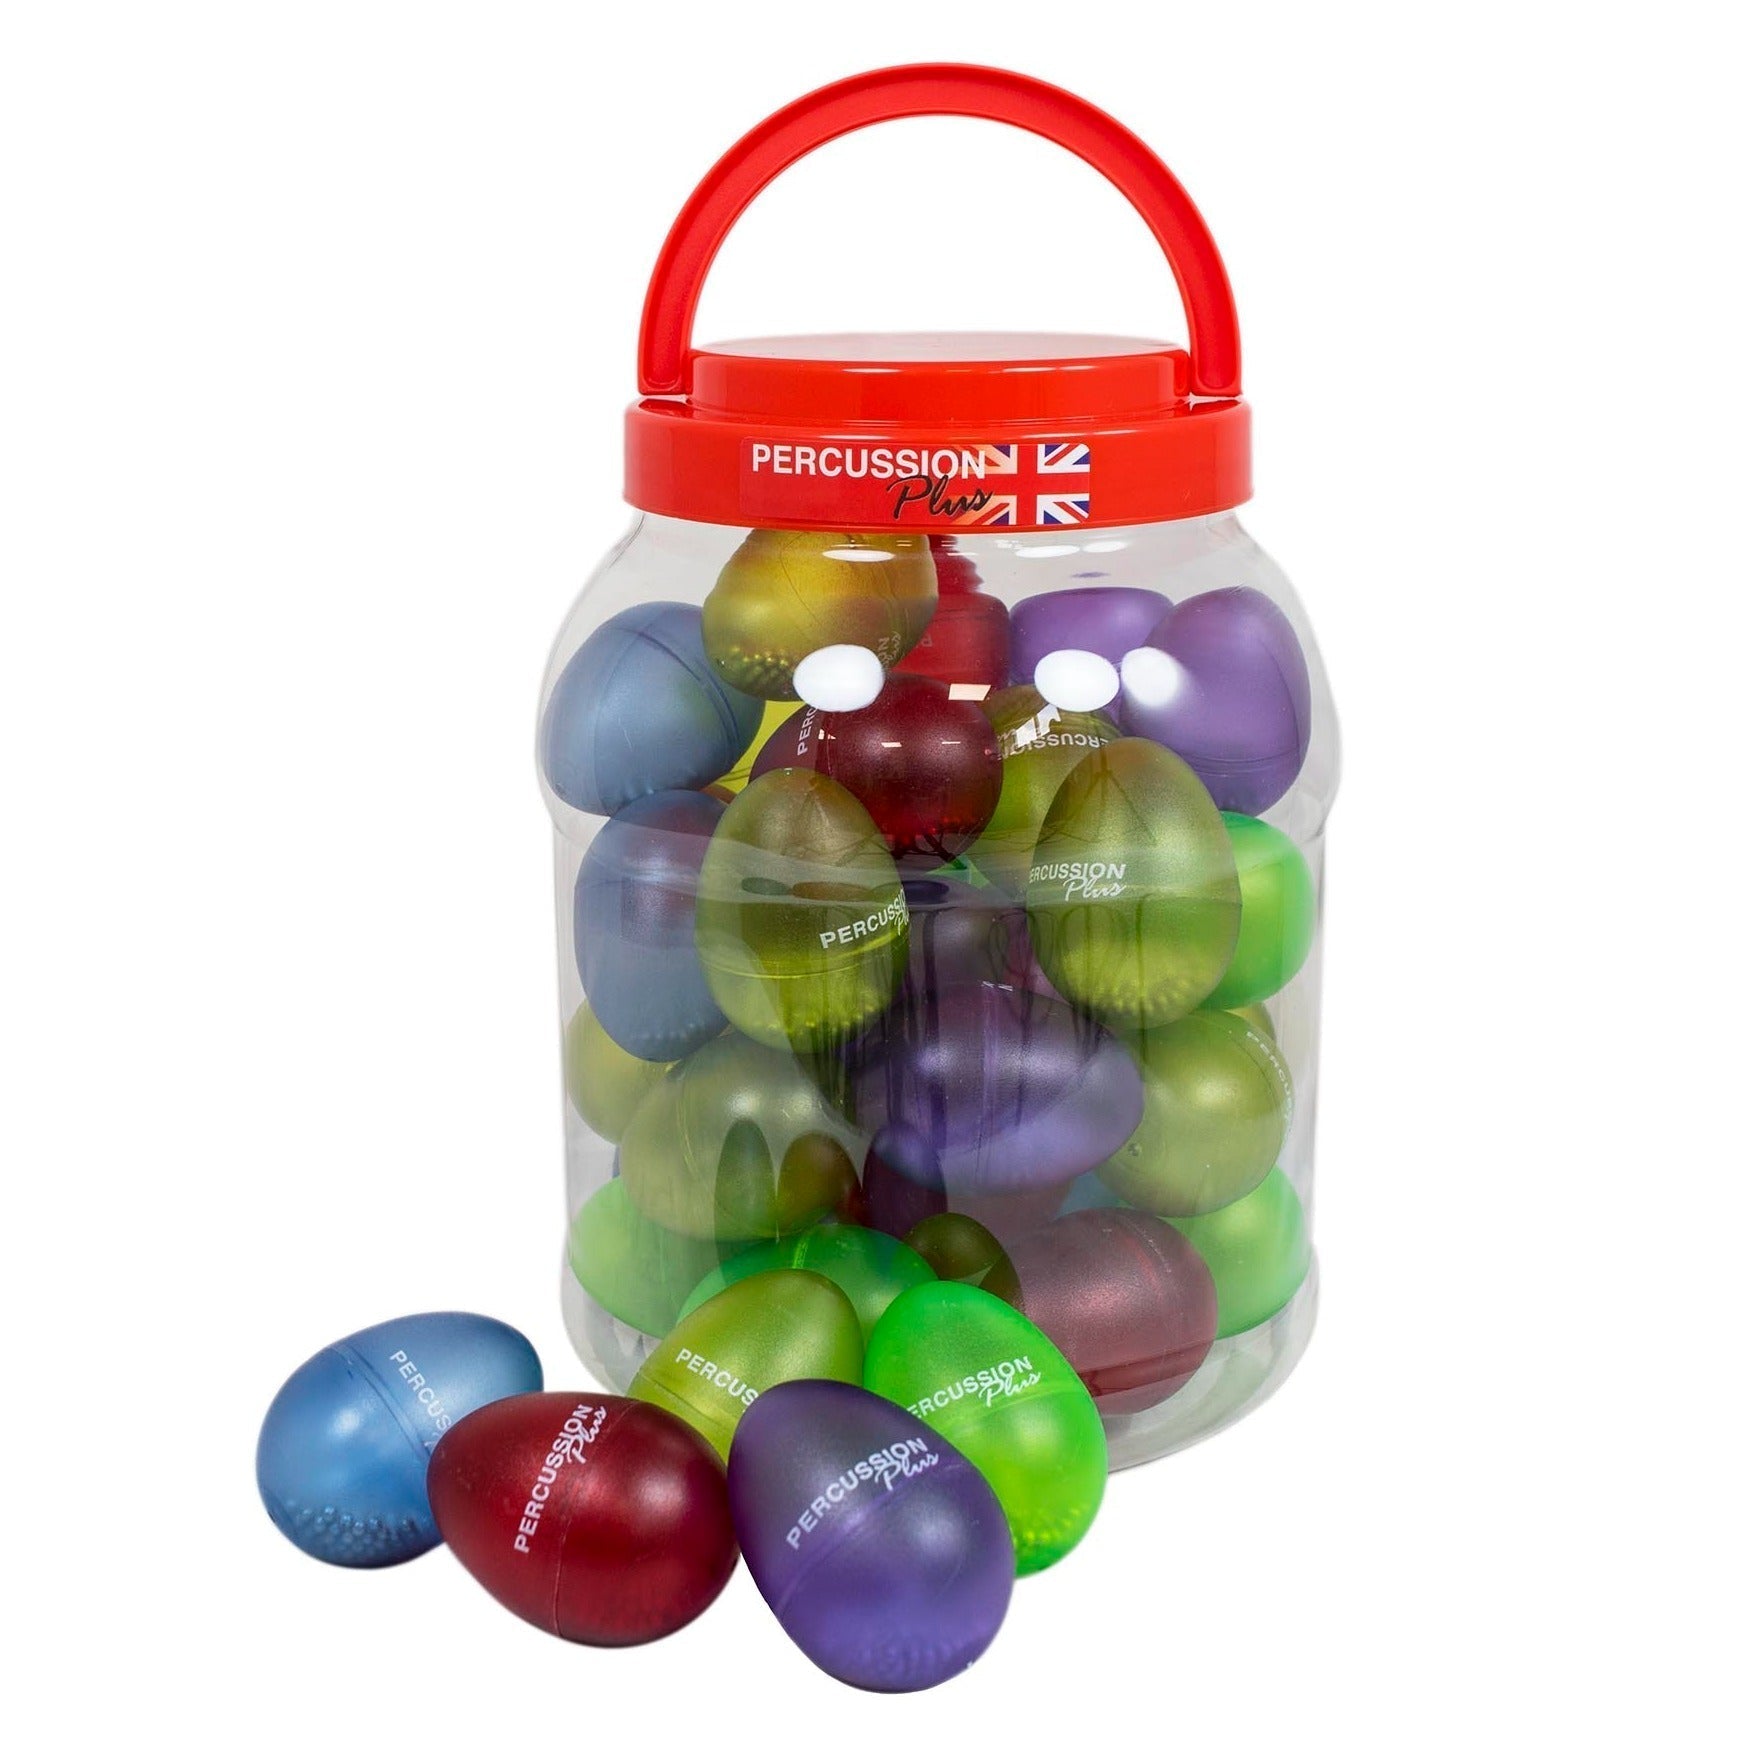 Tub of 40 Egg Shaker Translucent Colours, A tub of 40 Egg Shakers in a variety of translucent colours. These Egg shakers are very durable with a tough plastic shell and long-lasting colour. They're great for musical workshops and for classroom use.These items are musical instruments, suitable for use by 3 year olds and above. Tub of 40 translucent egg shakers - ideal for music clubs and workshops Tough plastic shells, light weight and ideal for small hands Shakers are supplied in large plastic tub with scre